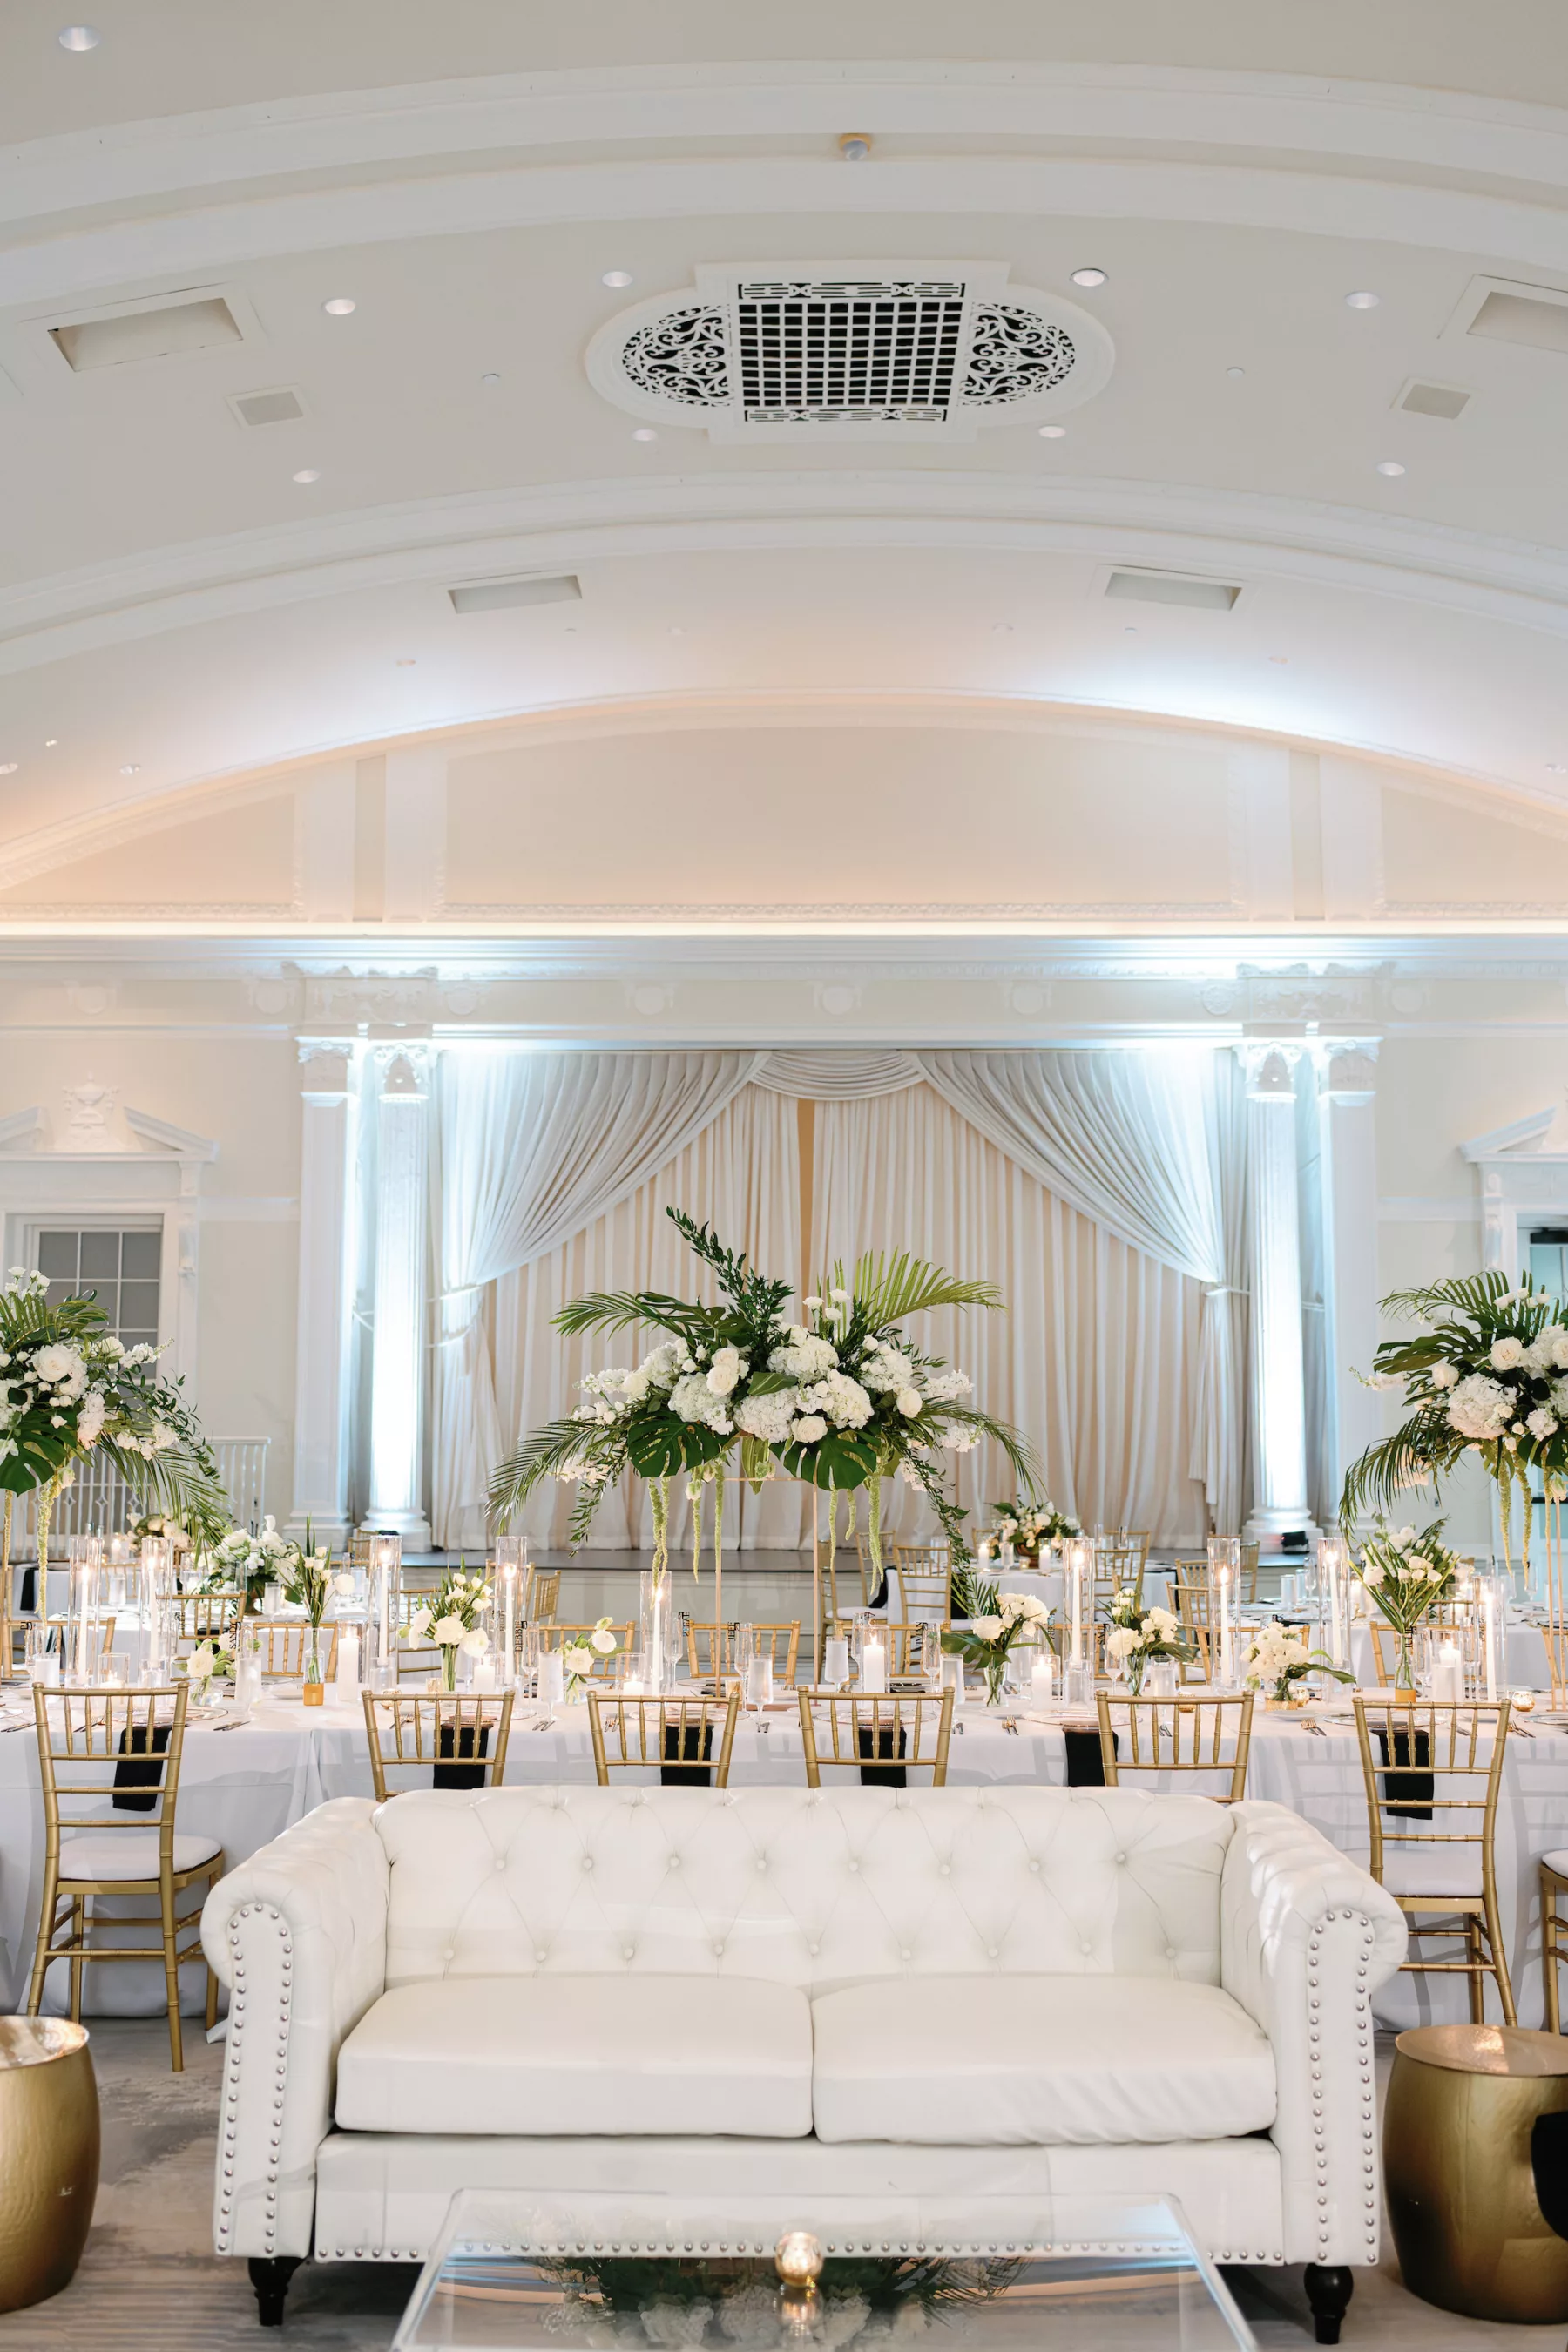 Modern Timeless White and Gold Ballroom Wedding Reception Ideas | White Tufted Couch Lounge Furniture Inspiration | Tropical Centerpiece Decor | Monstera Leaf, White Hydrangeas and Roses Floral Arrangement | Tampa Bay Event Planner Coastal Coordinating | St Pete Florist Botanica Design Studio